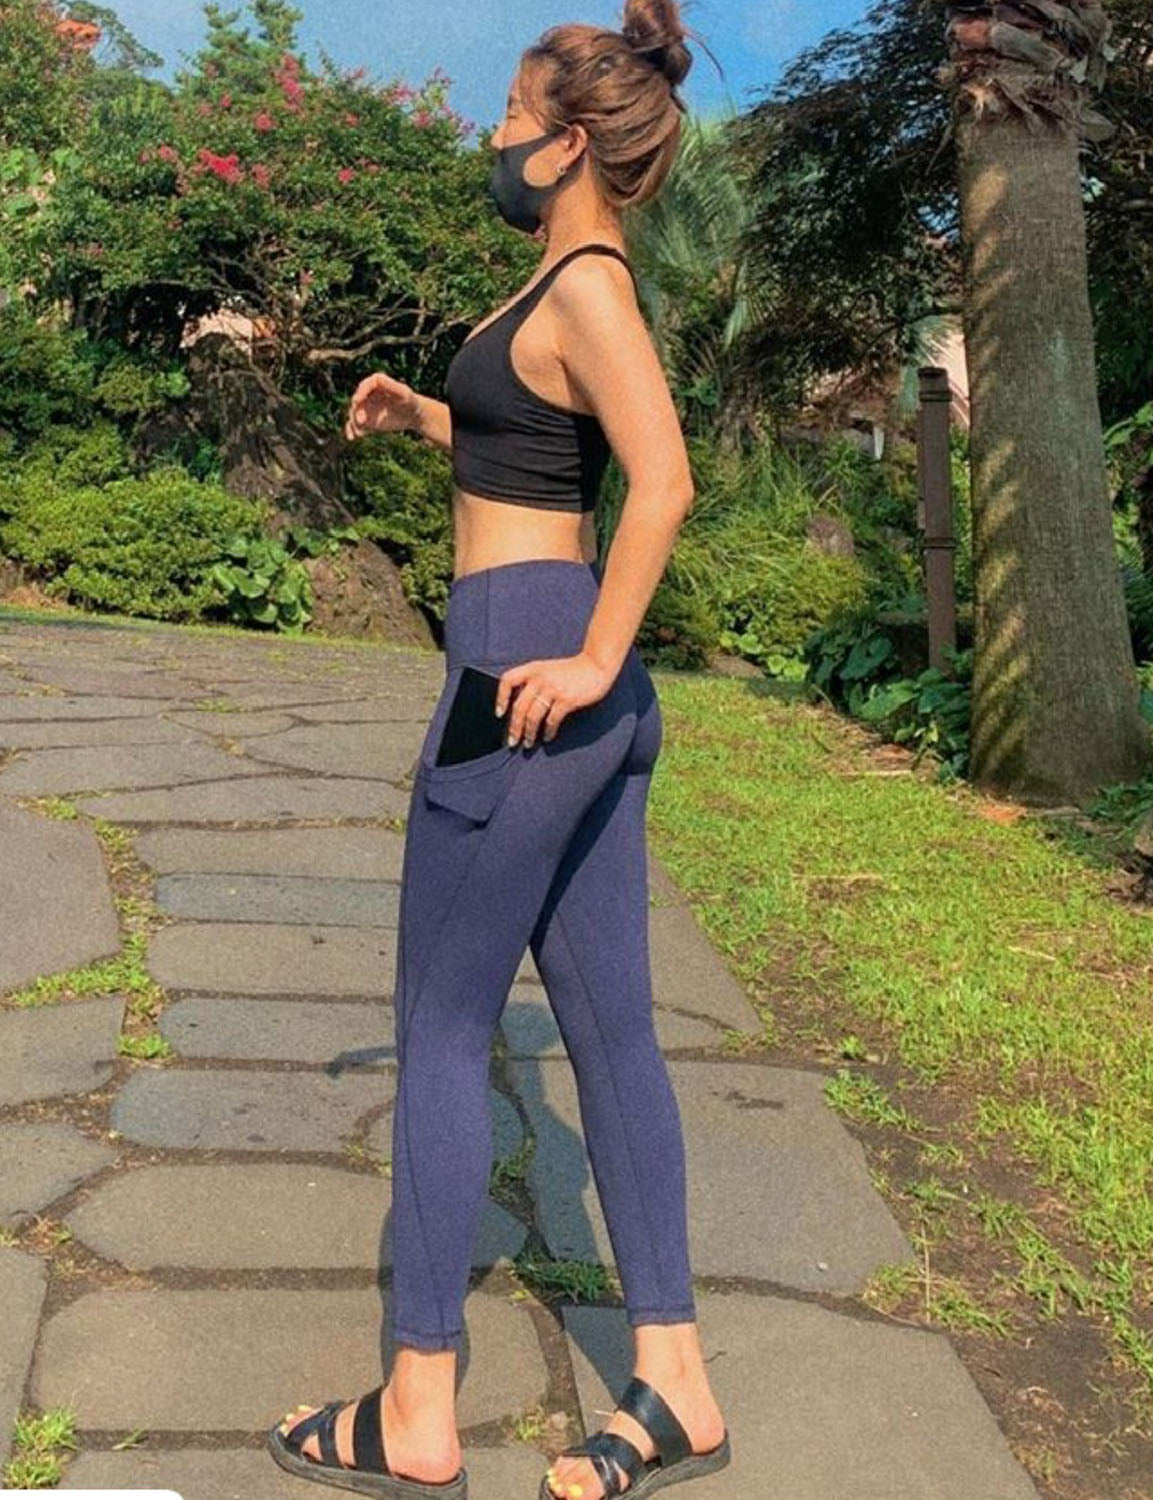 High Waist Side Pockets yogastudio Pants navy 75% Nylon, 25% Spandex Fabric doesn't attract lint easily 4-way stretch No see-through Moisture-wicking Tummy control Inner pocket